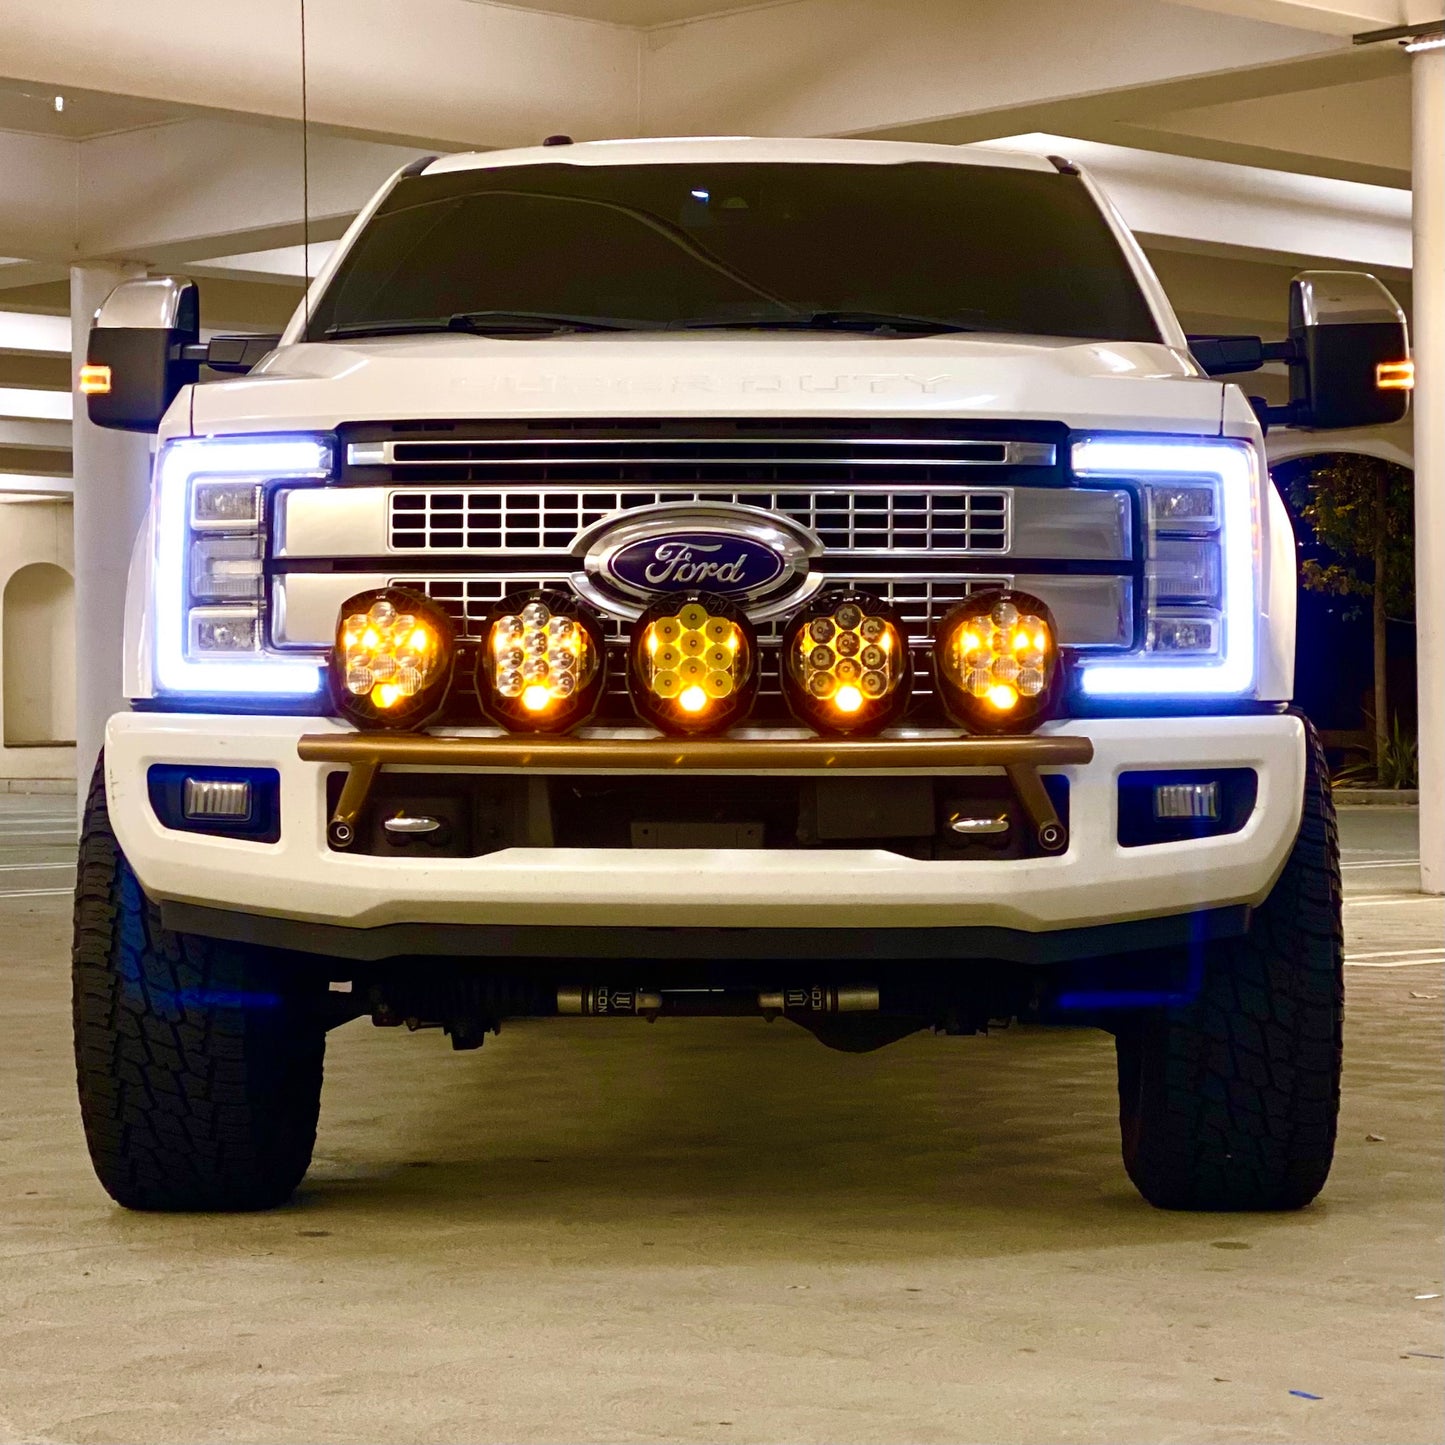 2017 - 2024 Ford Super Duty Light Mount - "The Classic" Trophy Truck Style featuring 5 Round Off-Road Light Tabs